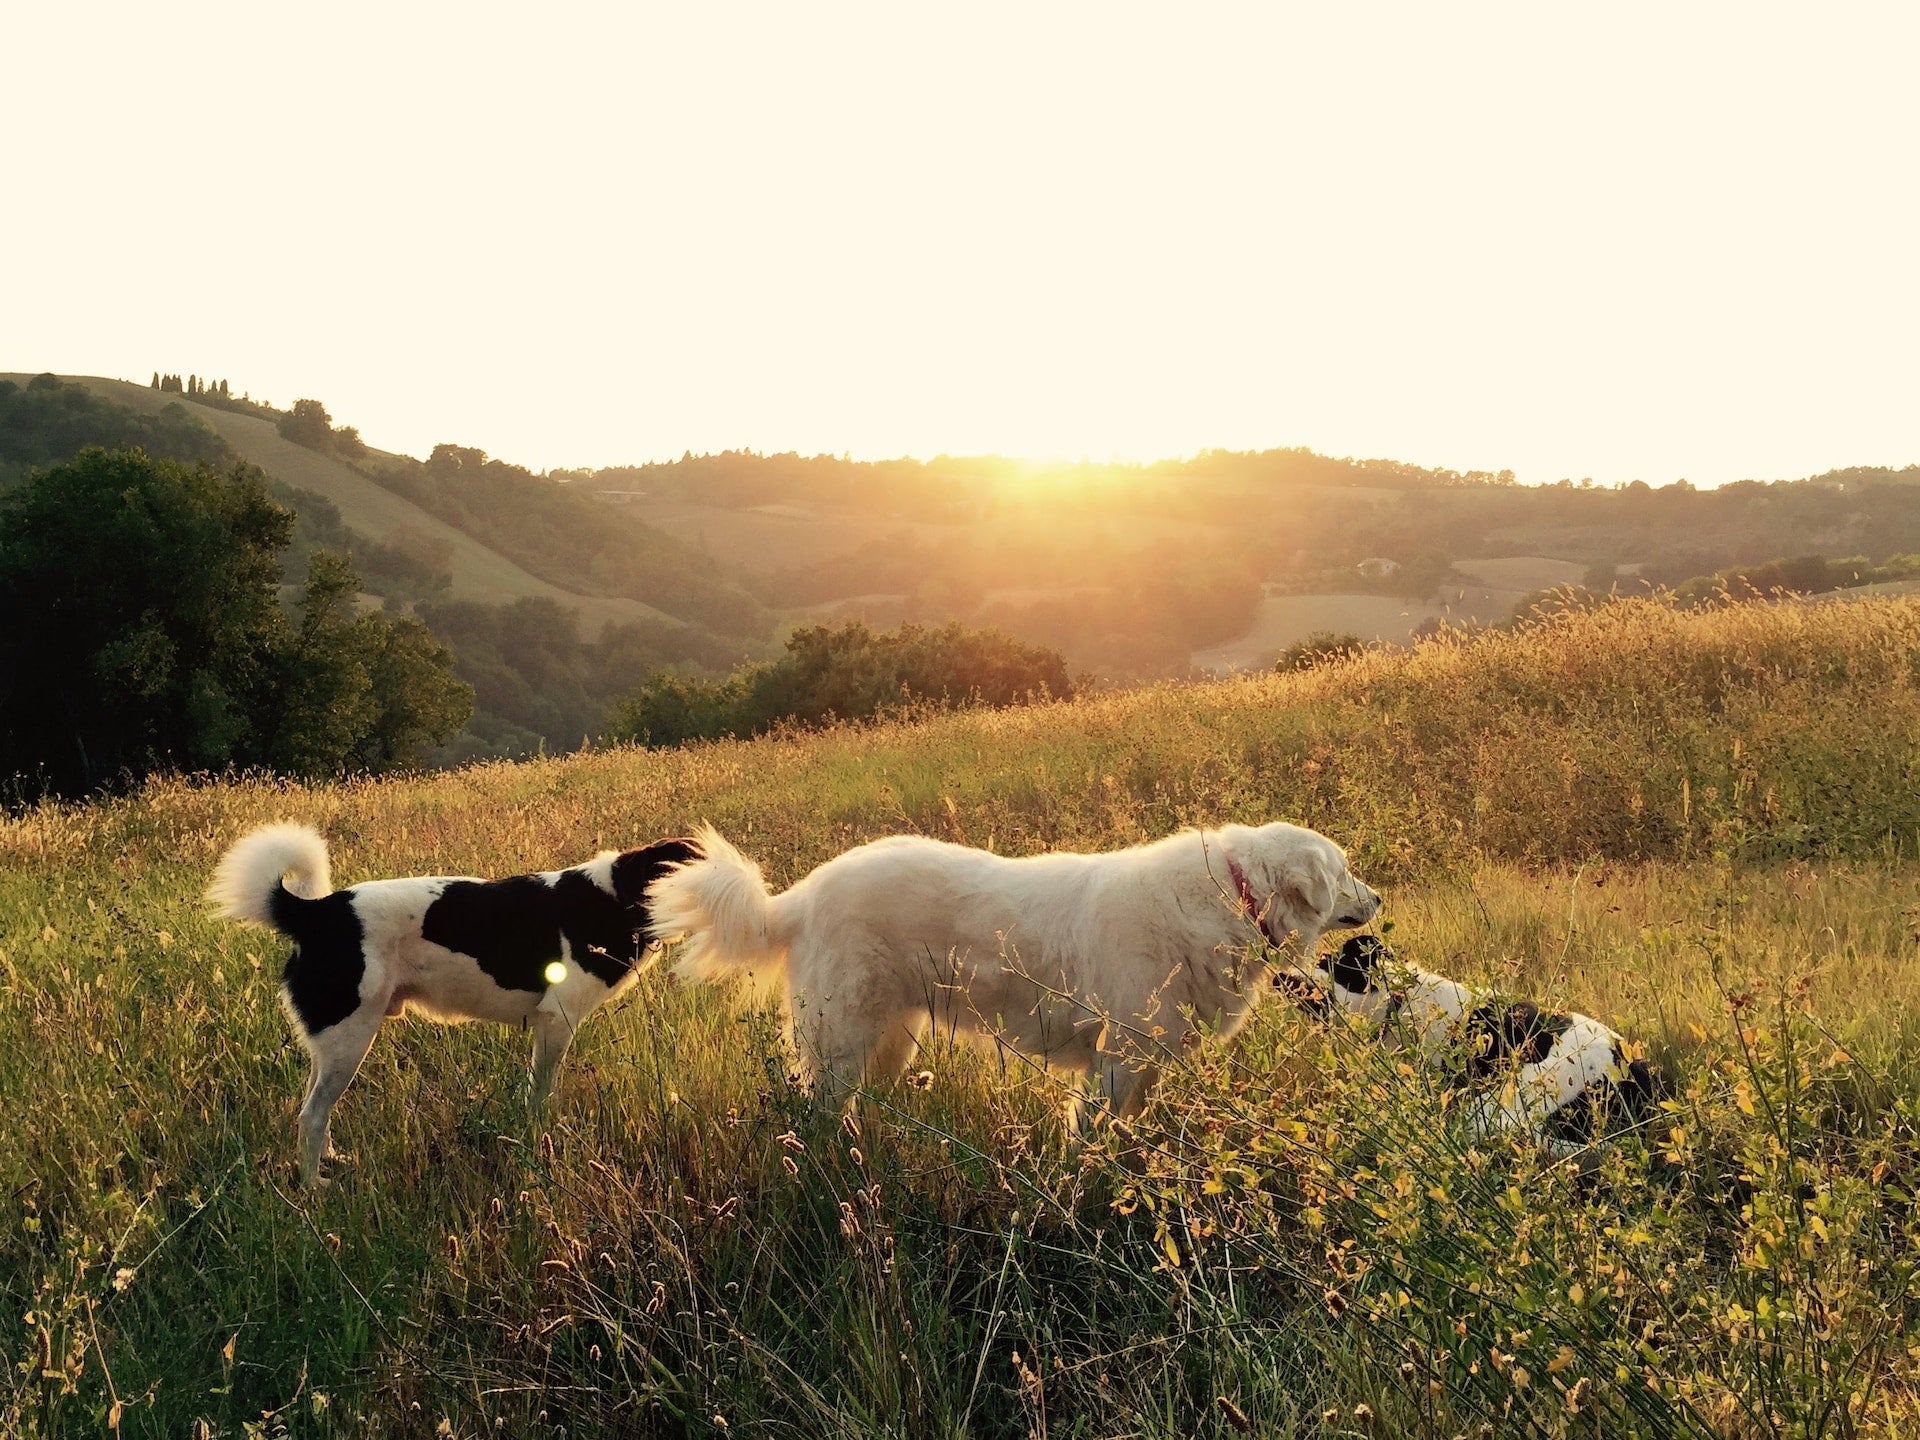 Three dogs in a field of grass that are not worried about fleas or ticks thanks to cedarwood oil